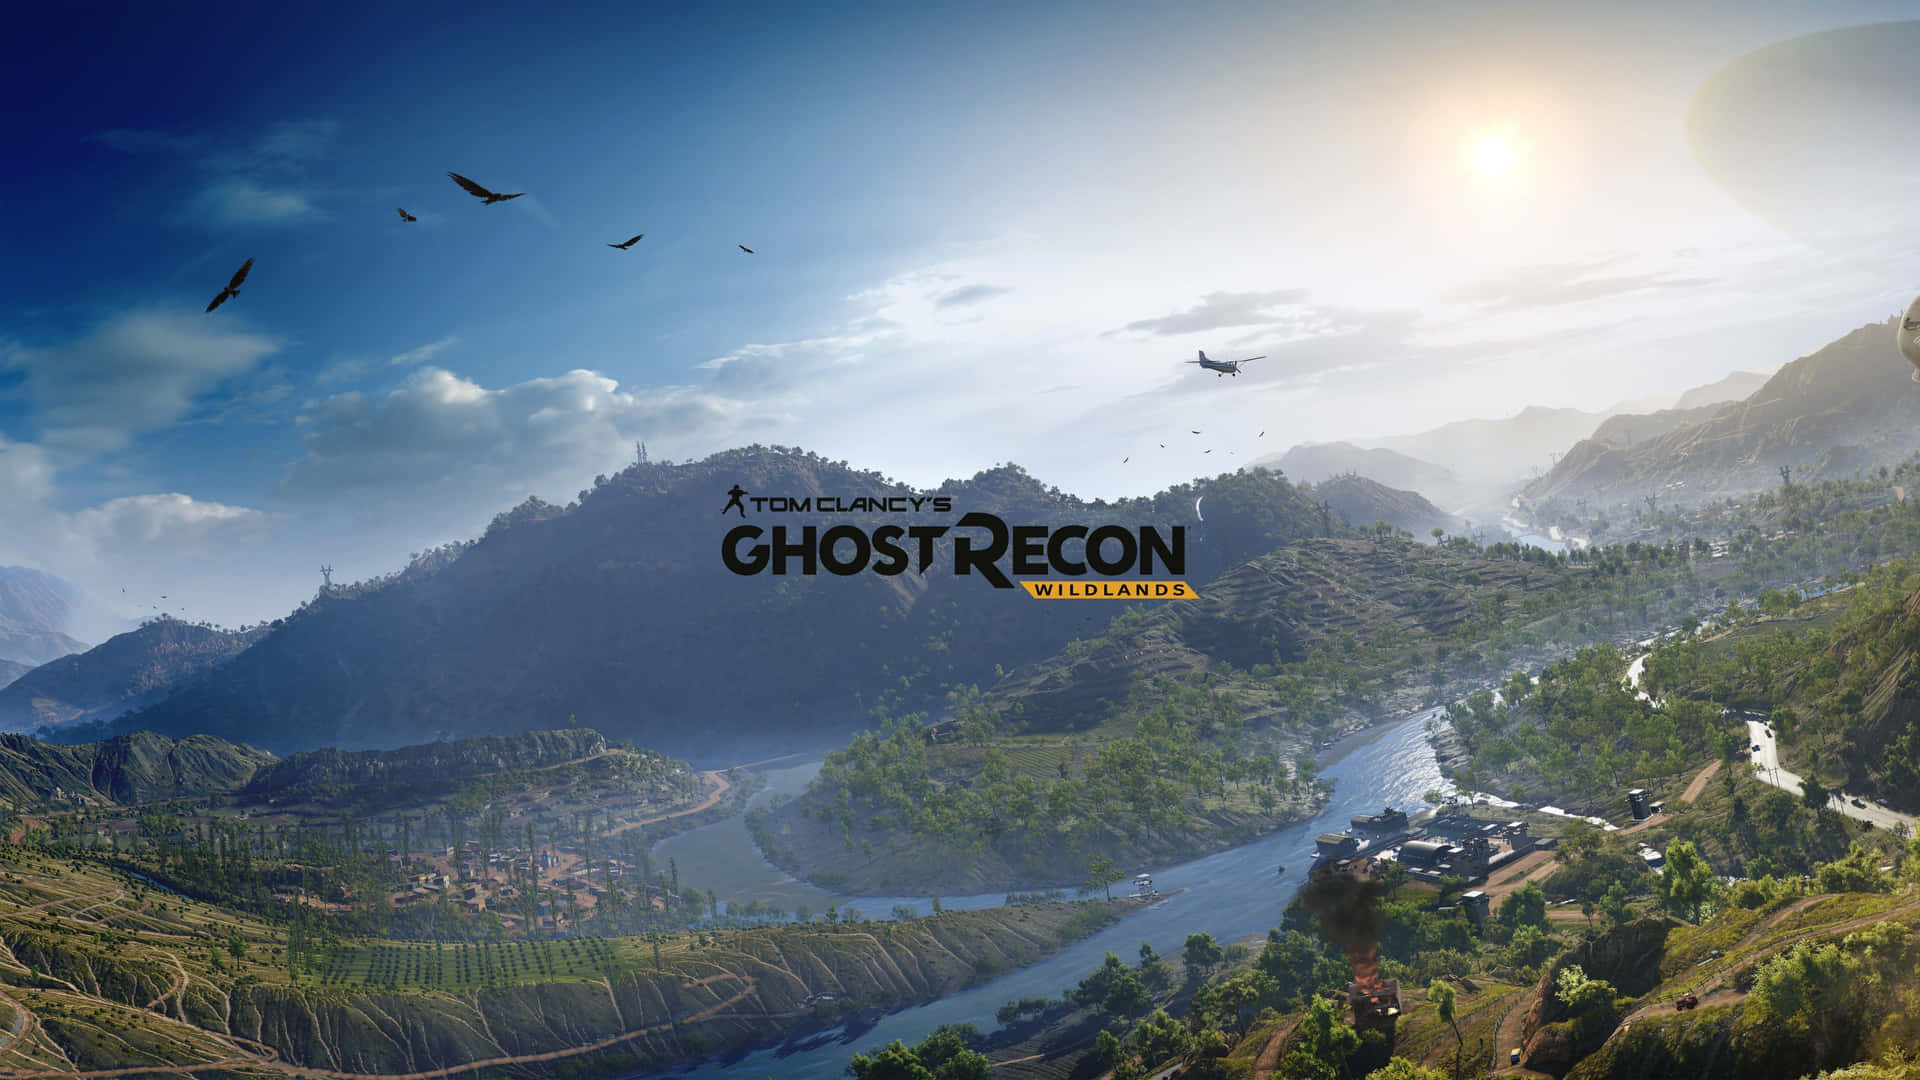 Caption: Intense Action in 4K Ghost Recon Gameplay Wallpaper